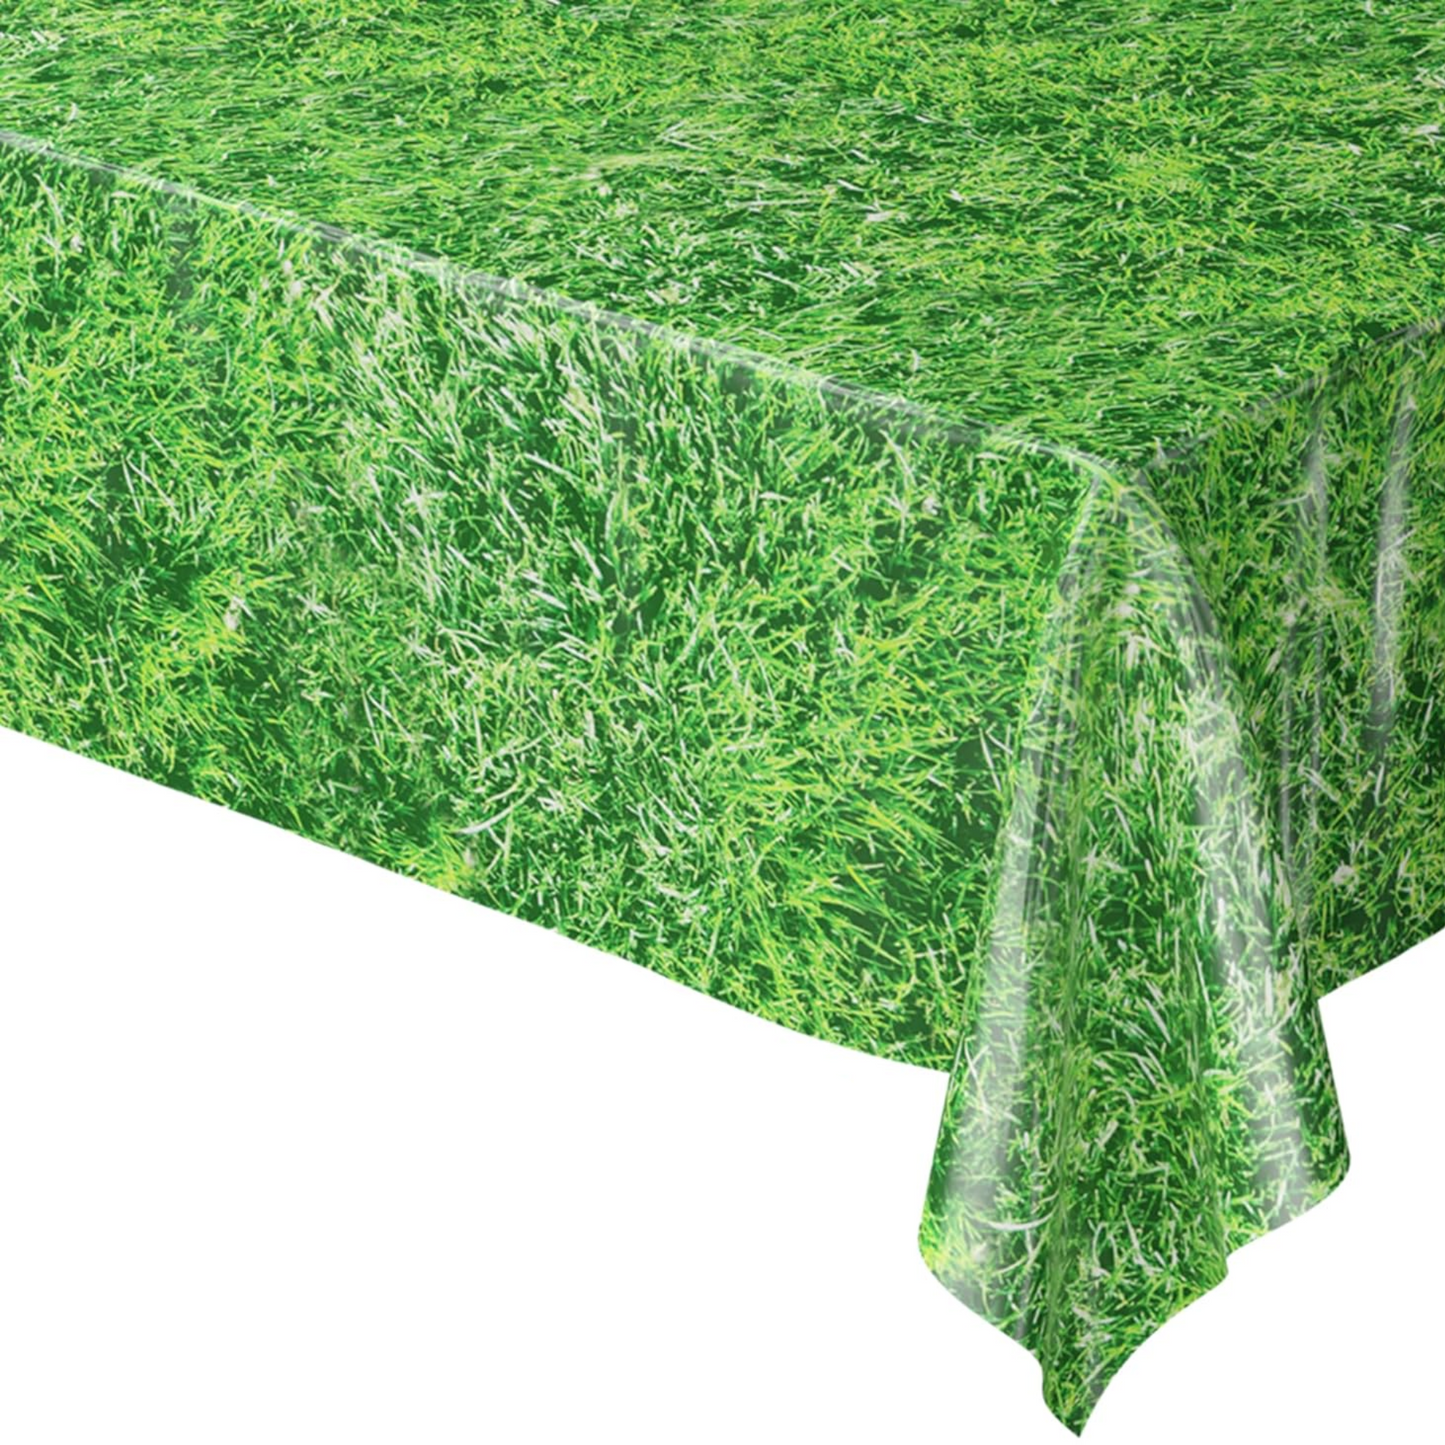 Mining Fun Grass Tablecovers 54in x 108in - 30 Packs (2 Each)